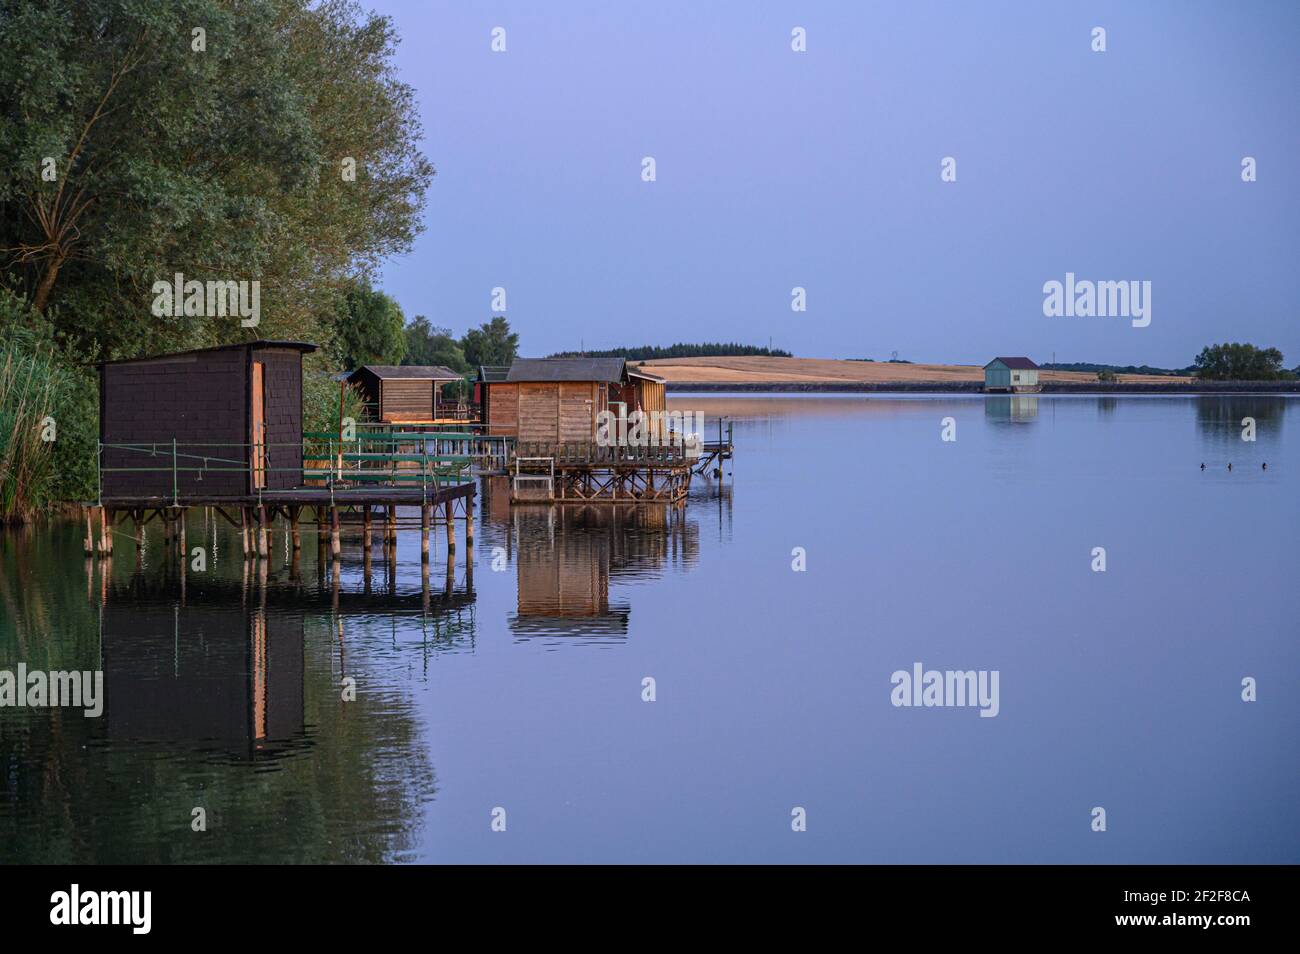 Calm lake water surface and several fishermen's stilt houses. Summer evening at Albe Lacs, Sarreguemines, France. Stock Photo